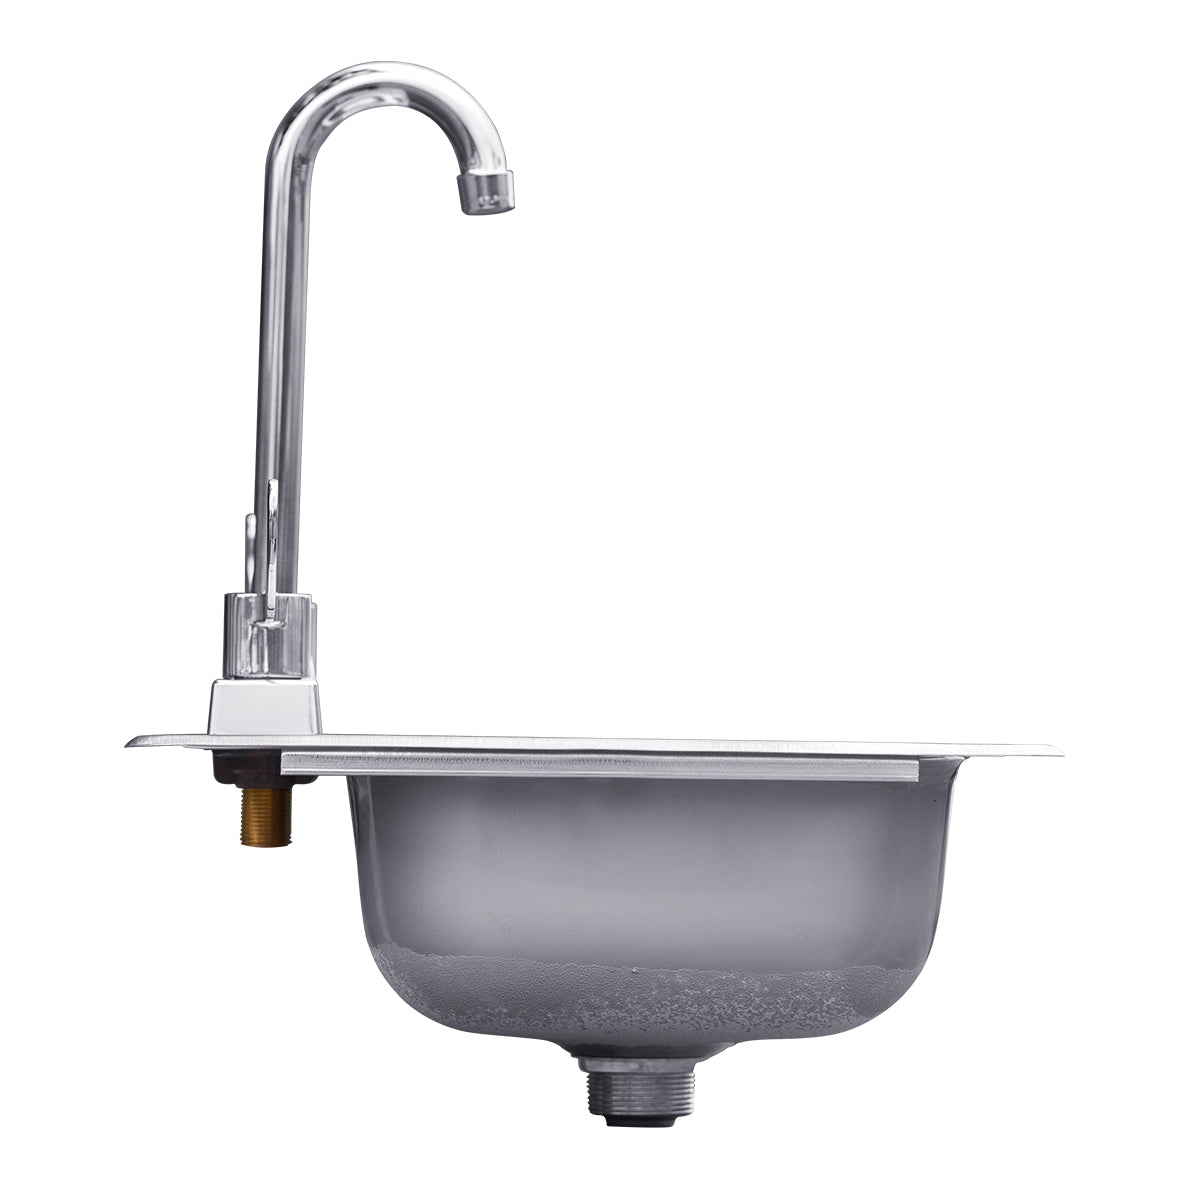 15" Drop-in Sink & Hot/Cold Faucet